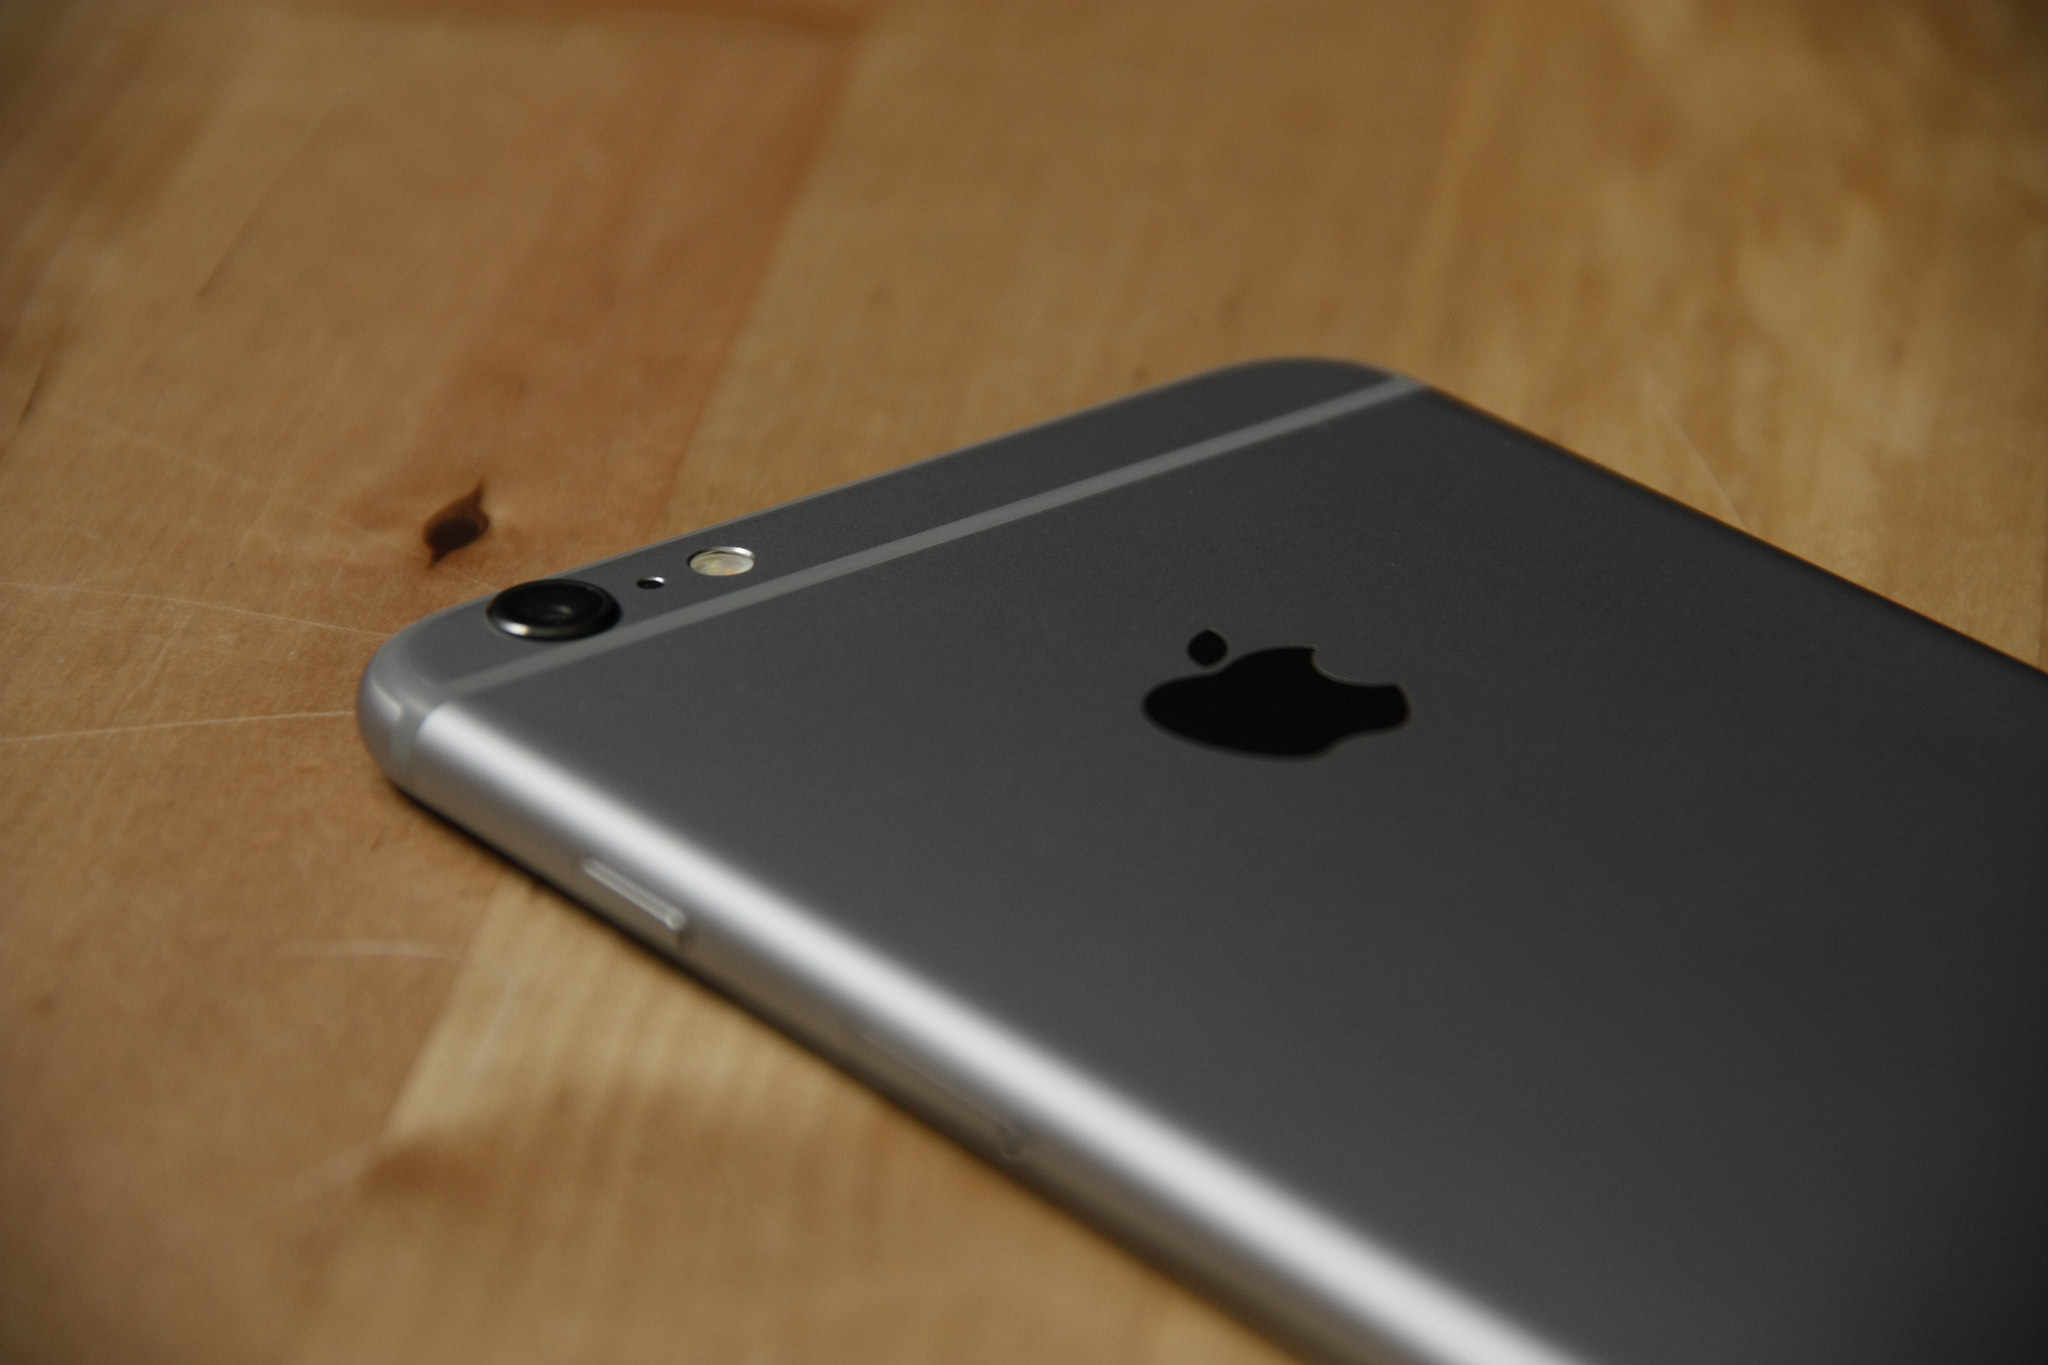 At the end of the month, Apple will "bury" the iPhone 6 Plus. But not yet completely